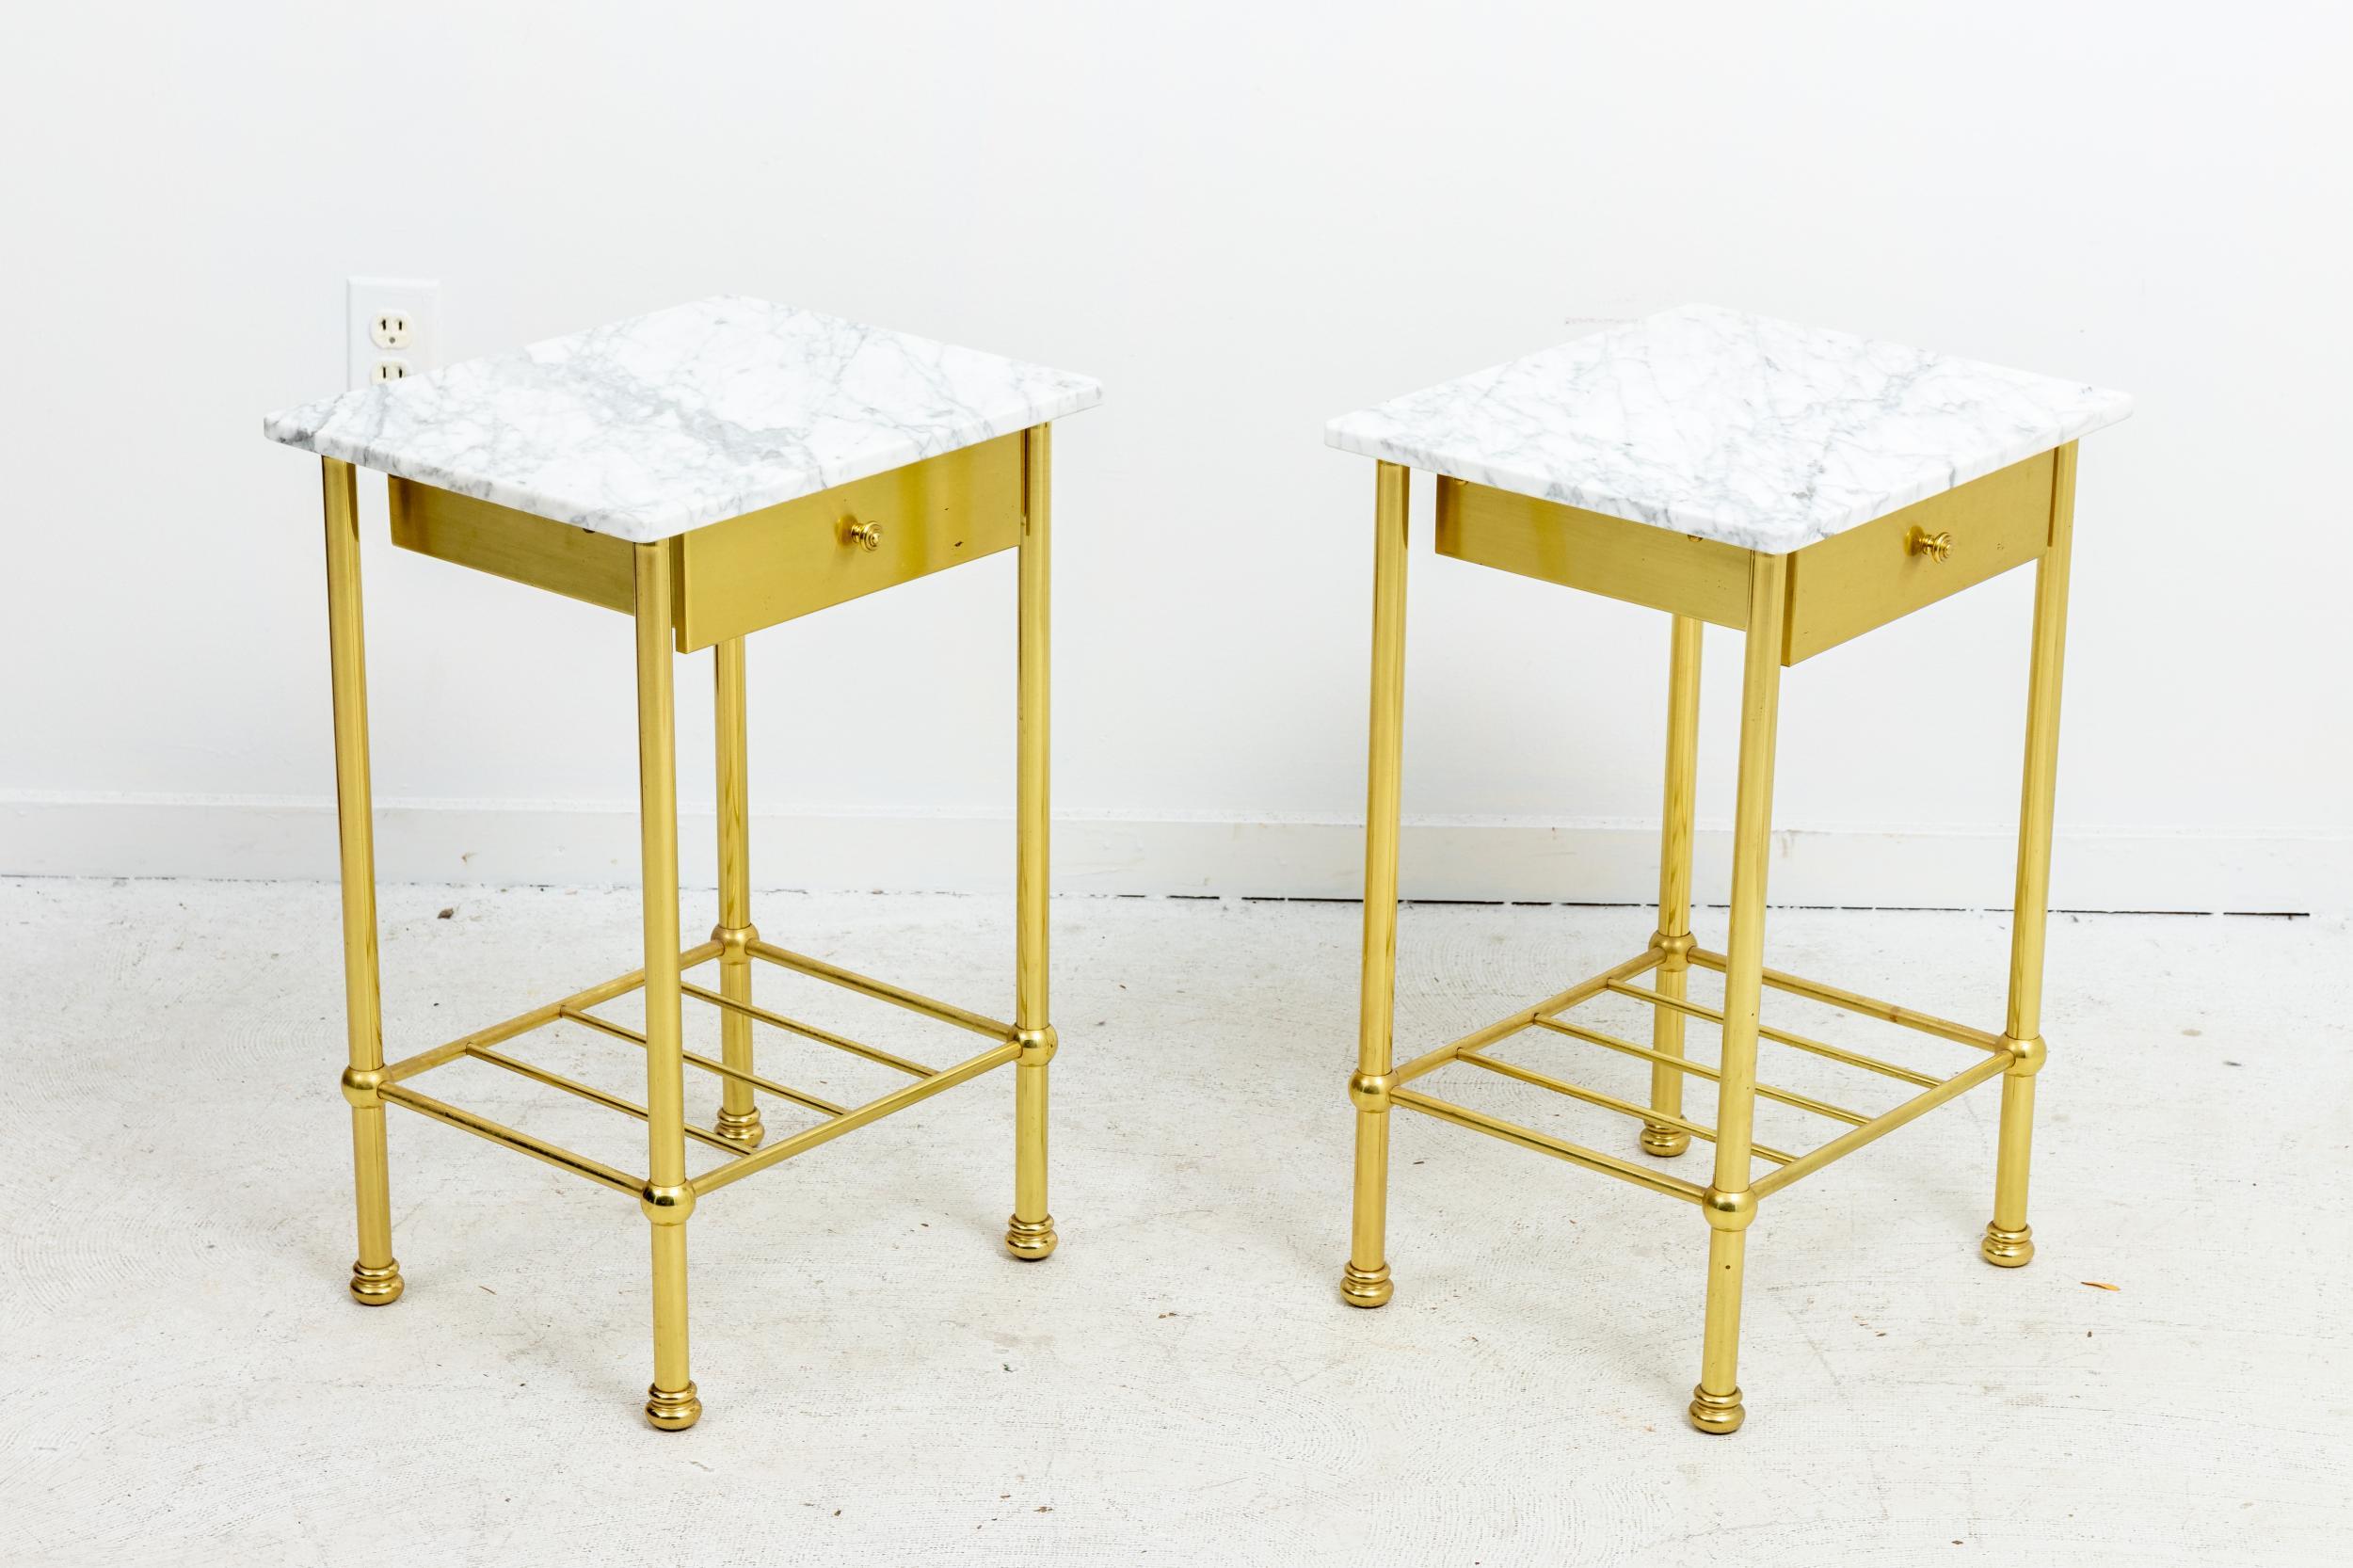 Pair of small side tables with polished brass base and white marble top, circa mid-20th century. The piece also features a single drawer and an open bottom shelf. Please note of wear consistent with age.